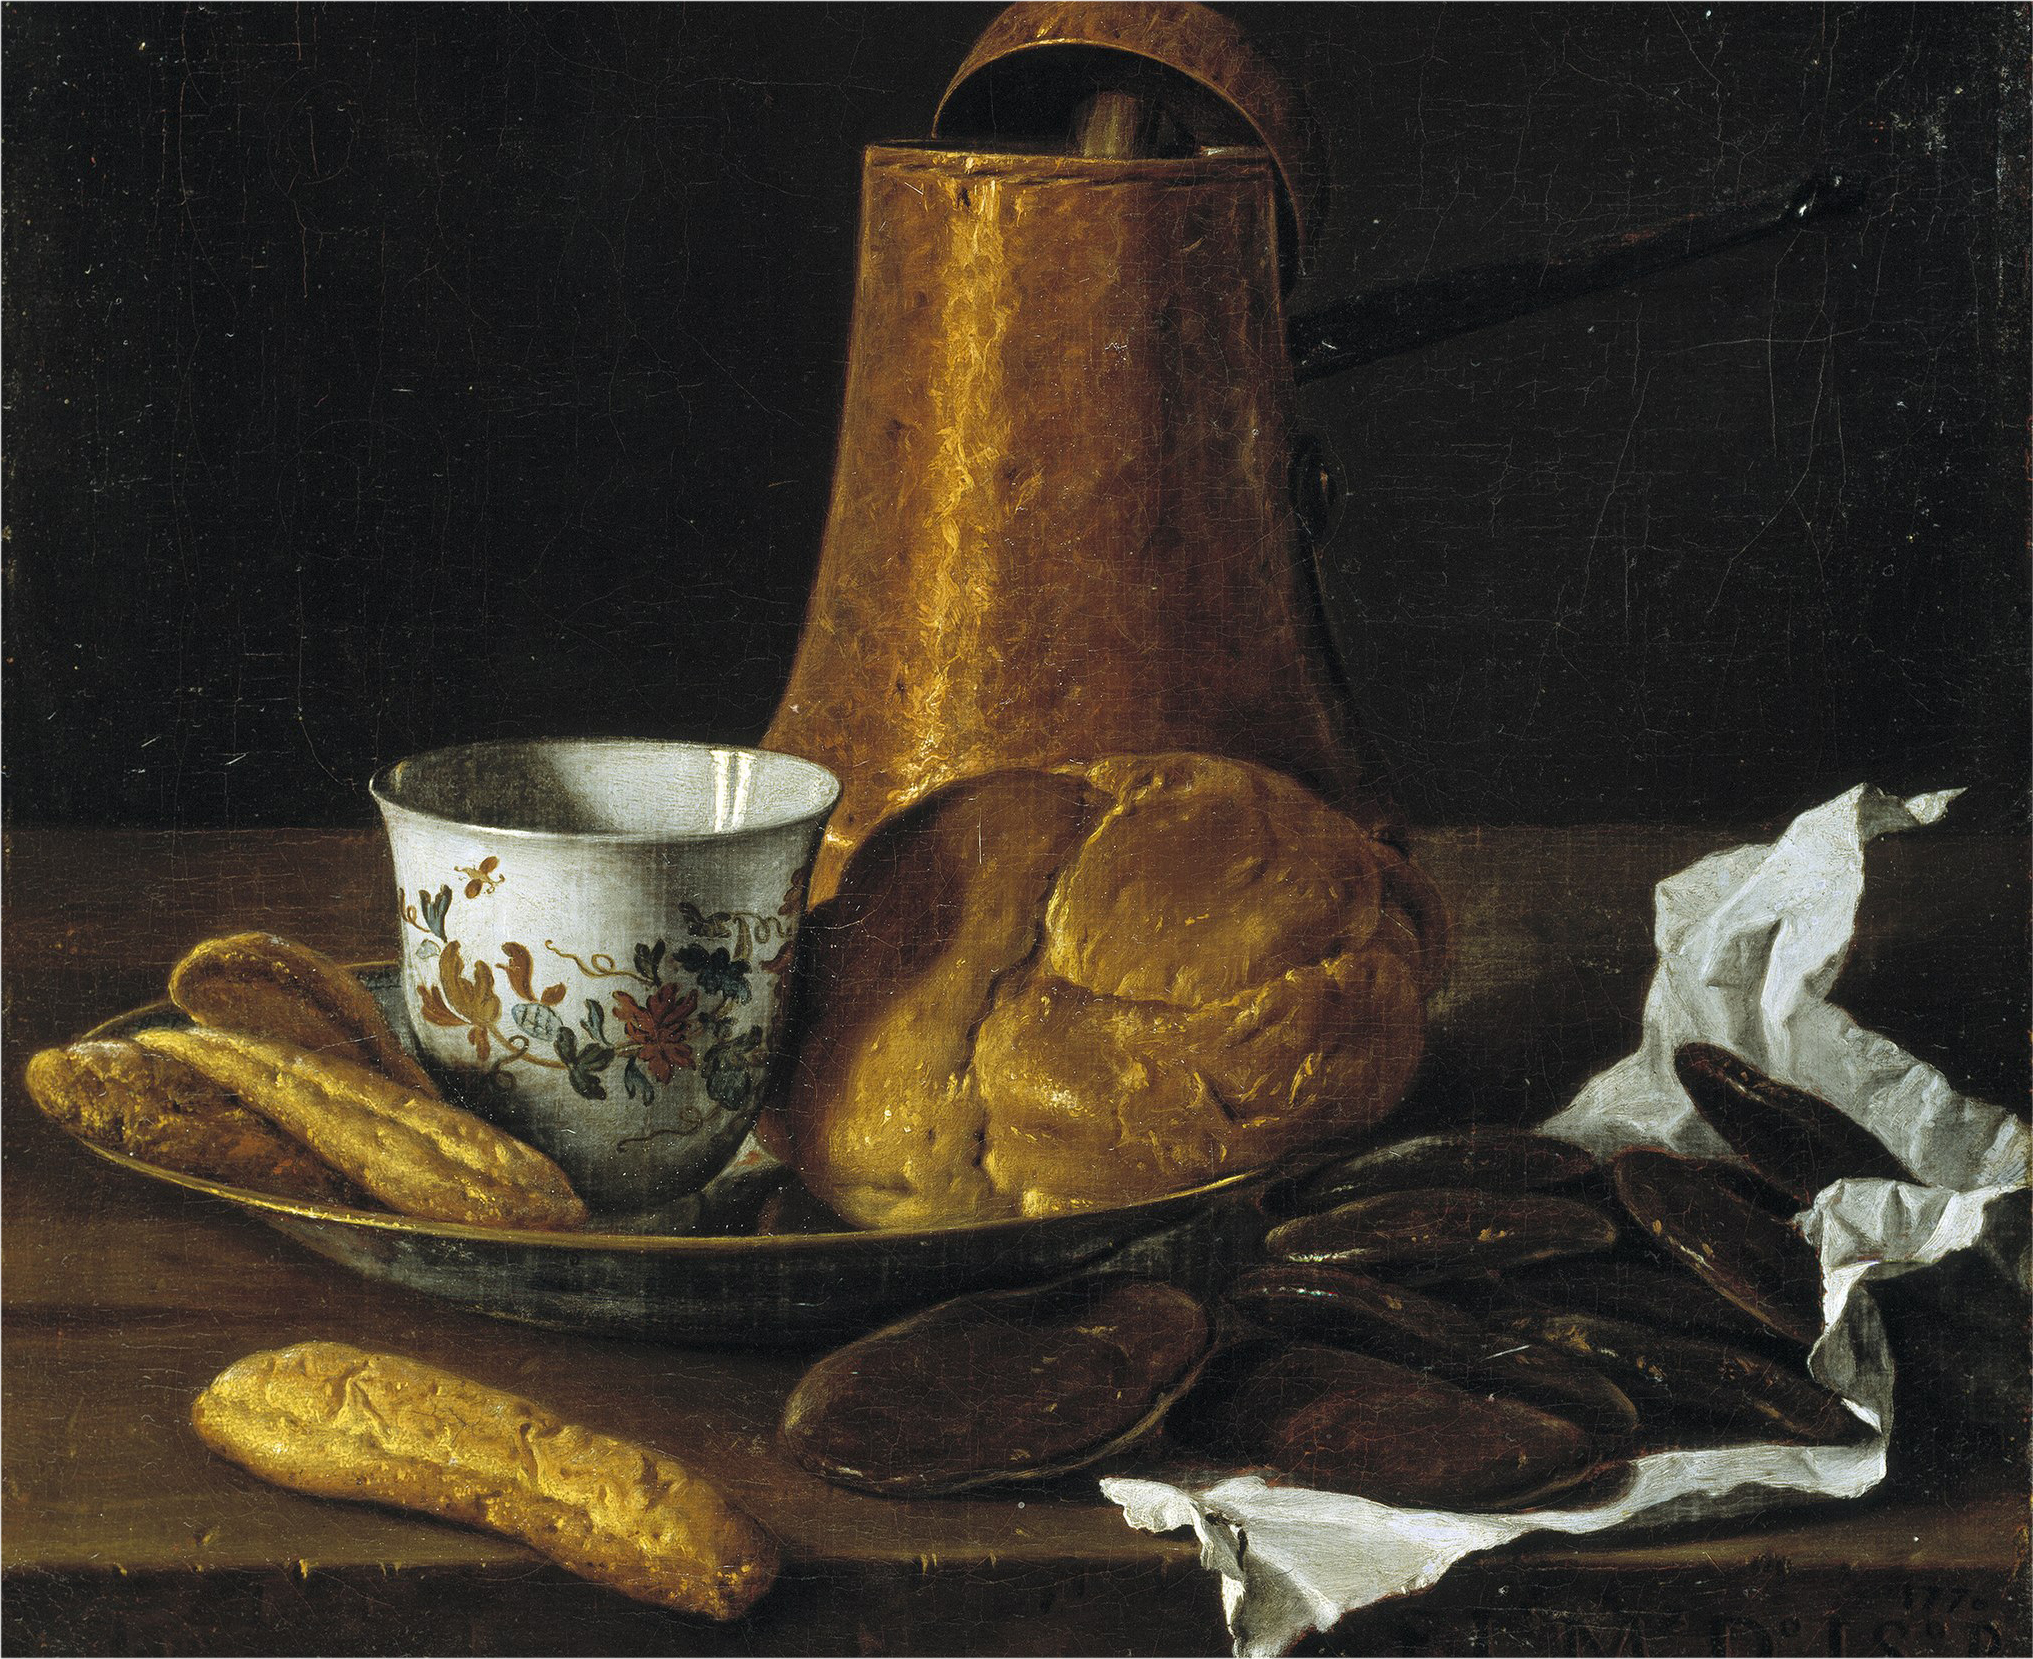 Portion of The painting Still Life with Chocolate Service by Luis Egidio Meléndez.